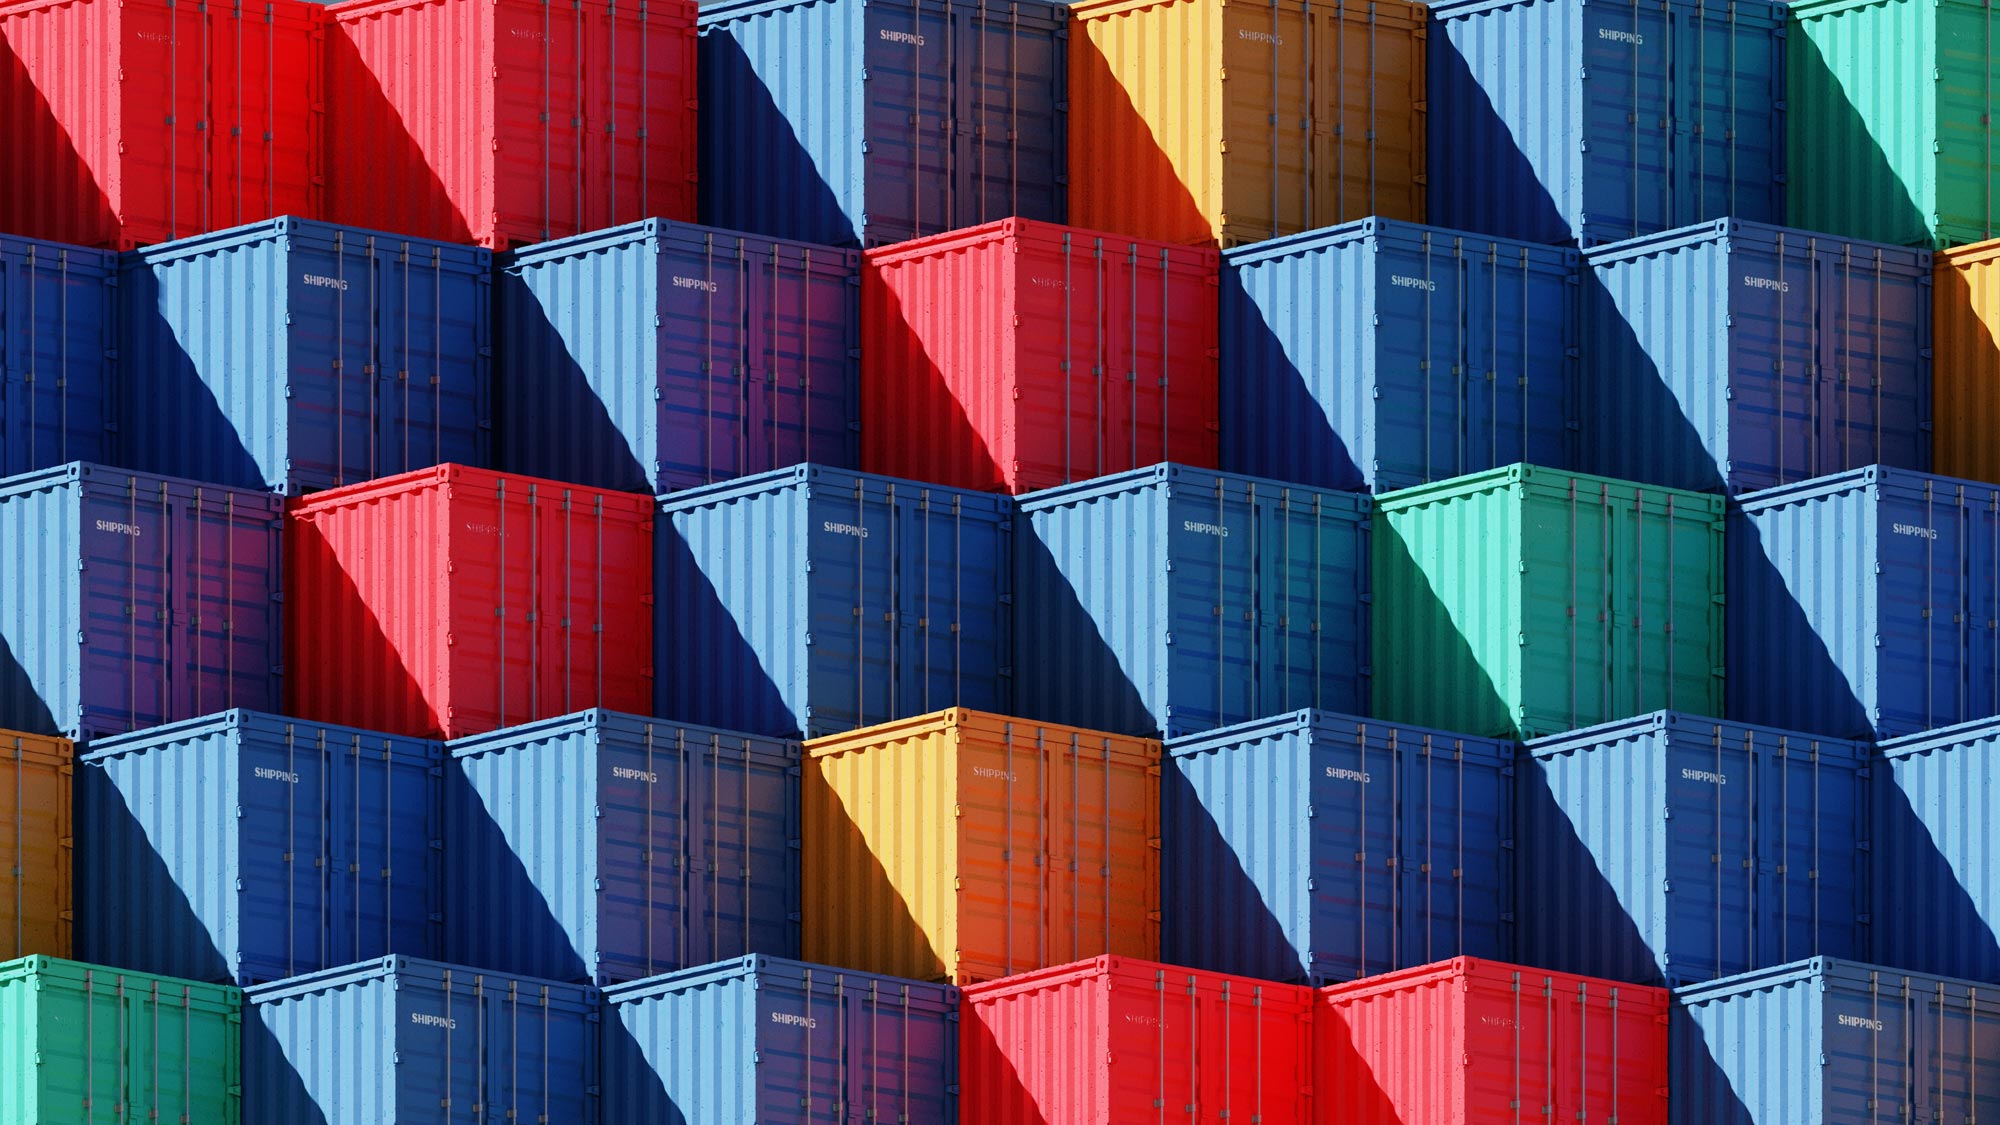 Image of multicolored shipping containers stacked on top of eachother